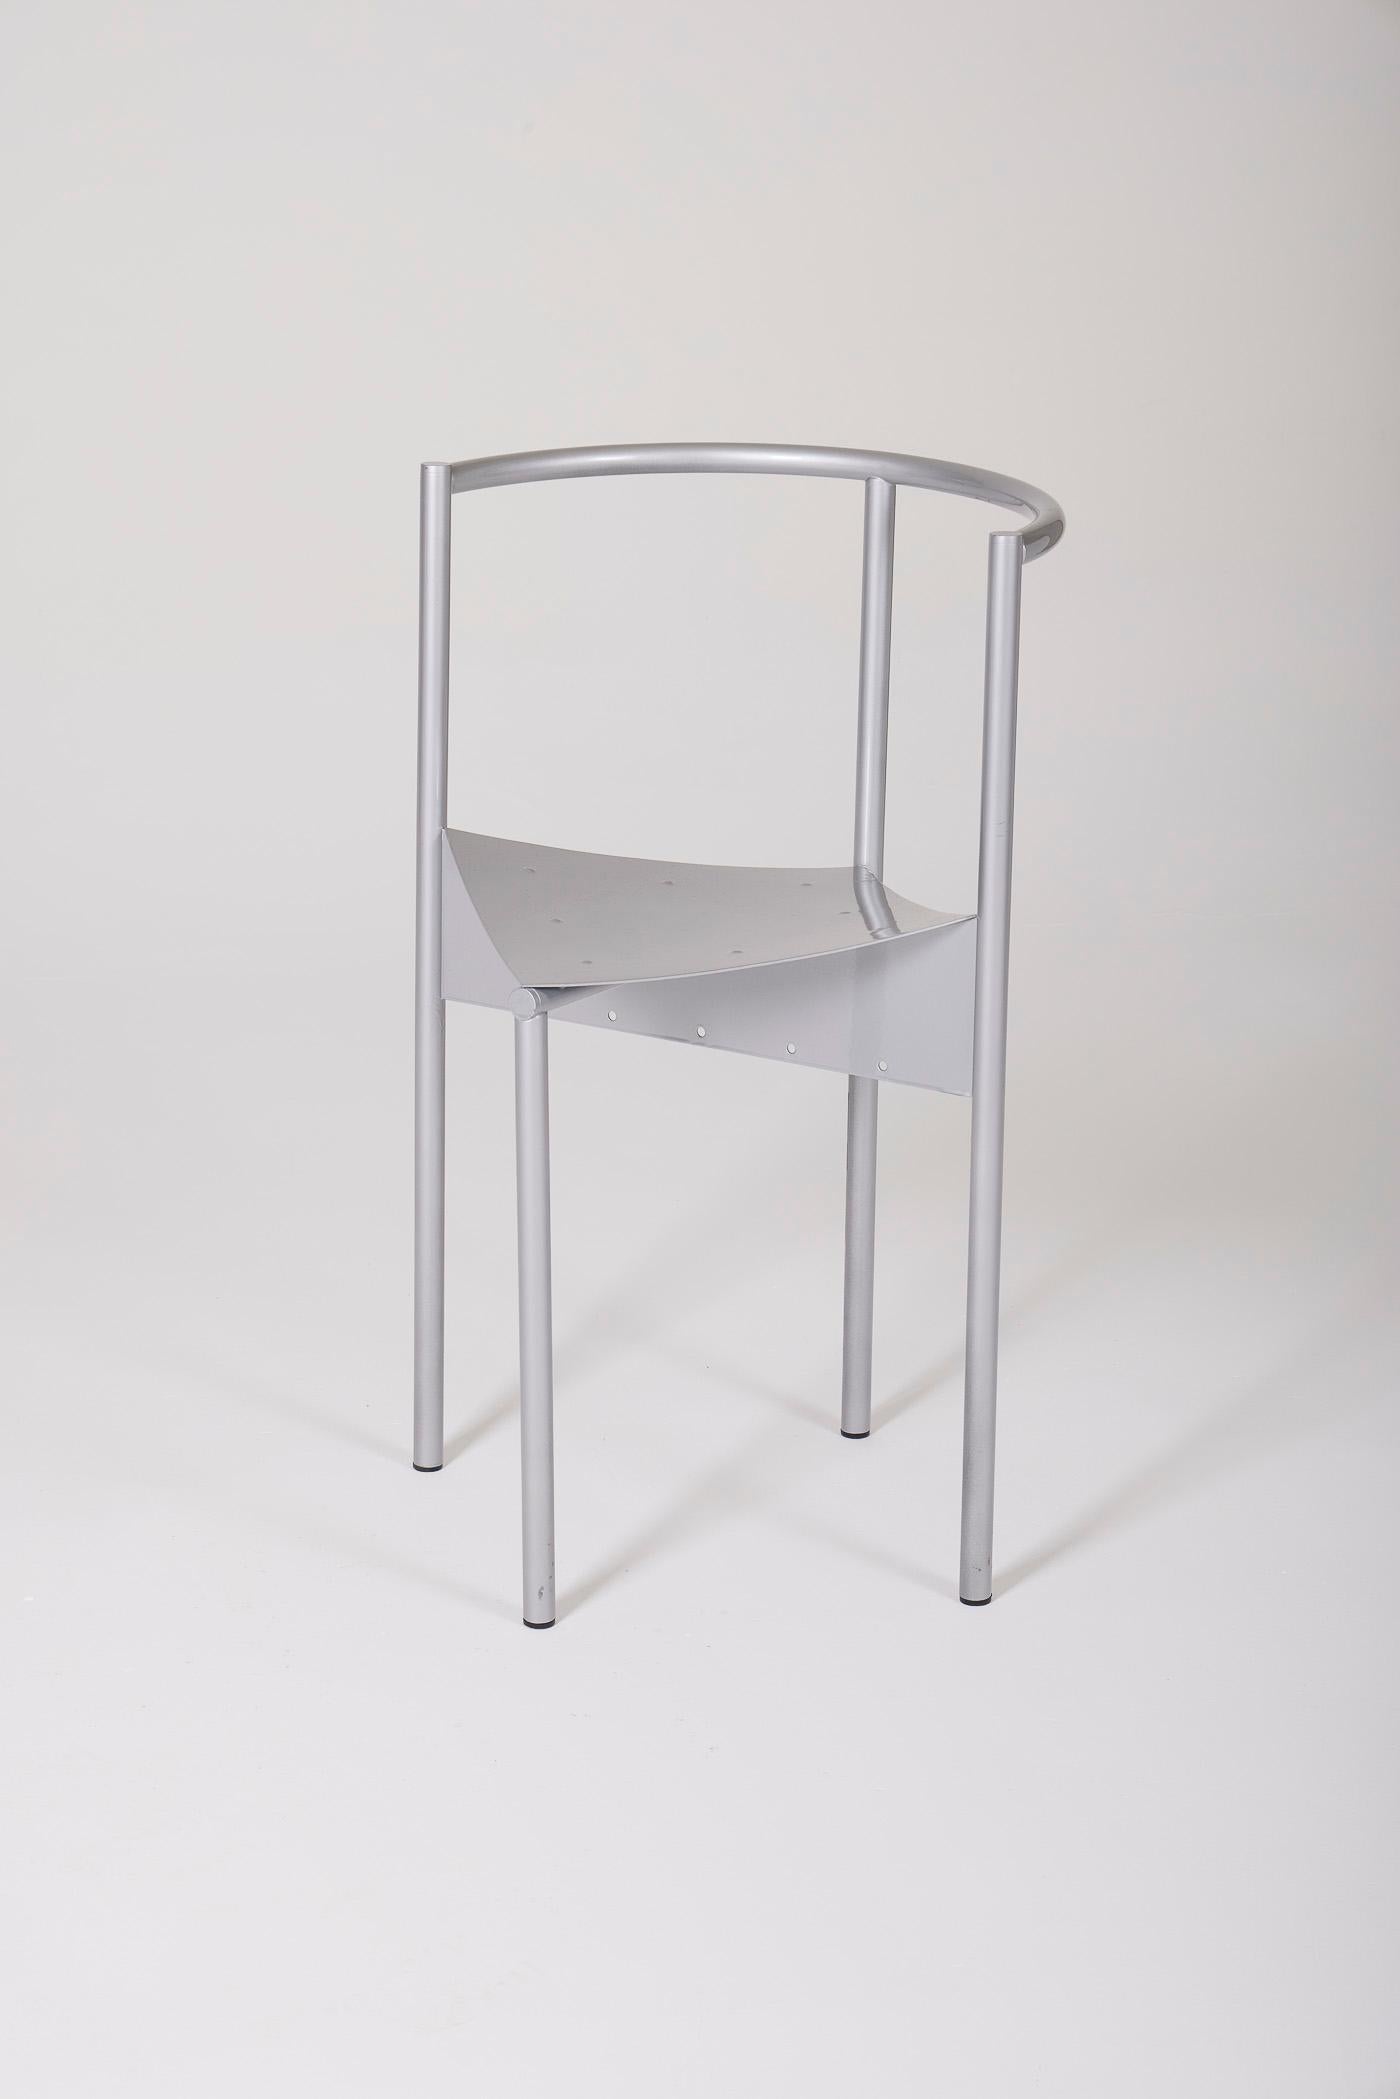 Chair model Wendy Wright by French designer Philippe Starck for Disform, from the 1980s. It is in white/grey anodized metal. In very good condition.
DV516